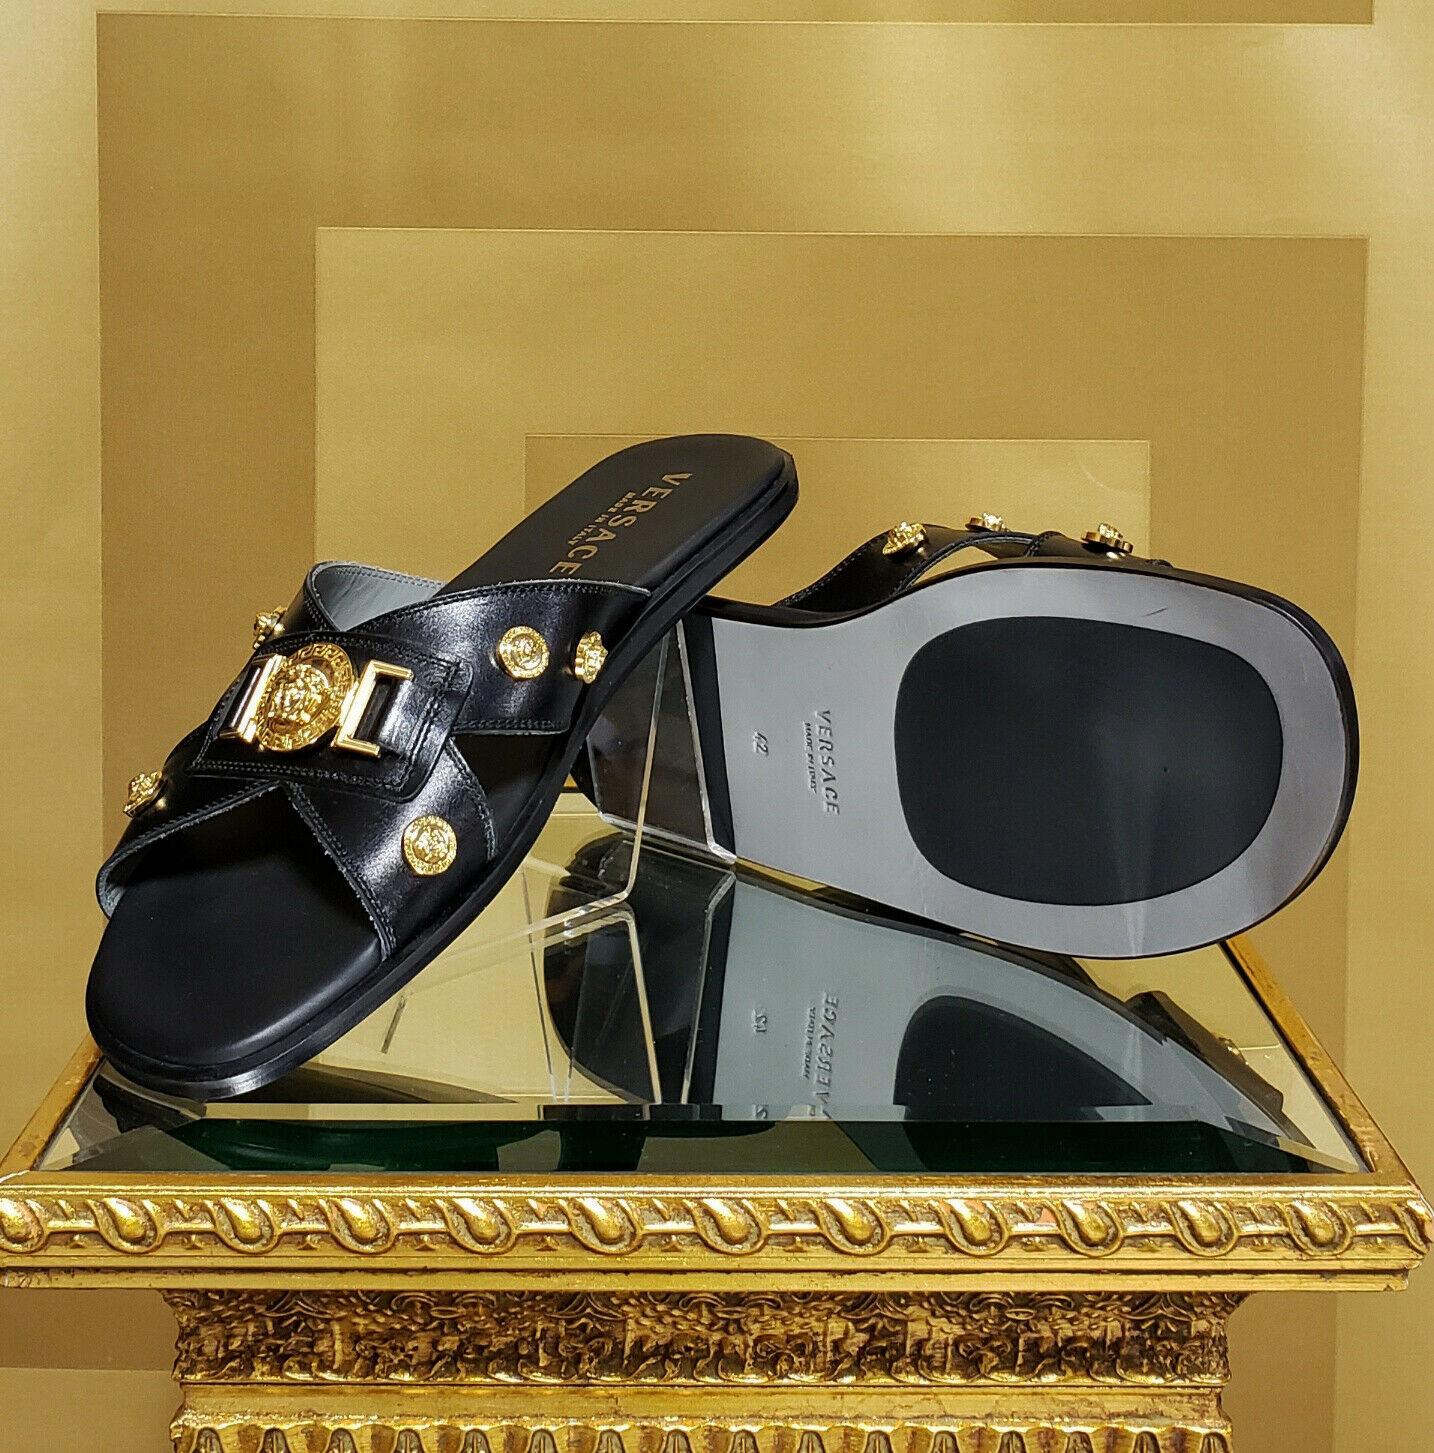 VERSACE

SANDALS
Color: black

Patent Leather 

Gold Plated Hardware

Medusa studs

Italy
Italian Size is 42 - US 9 
insole 11